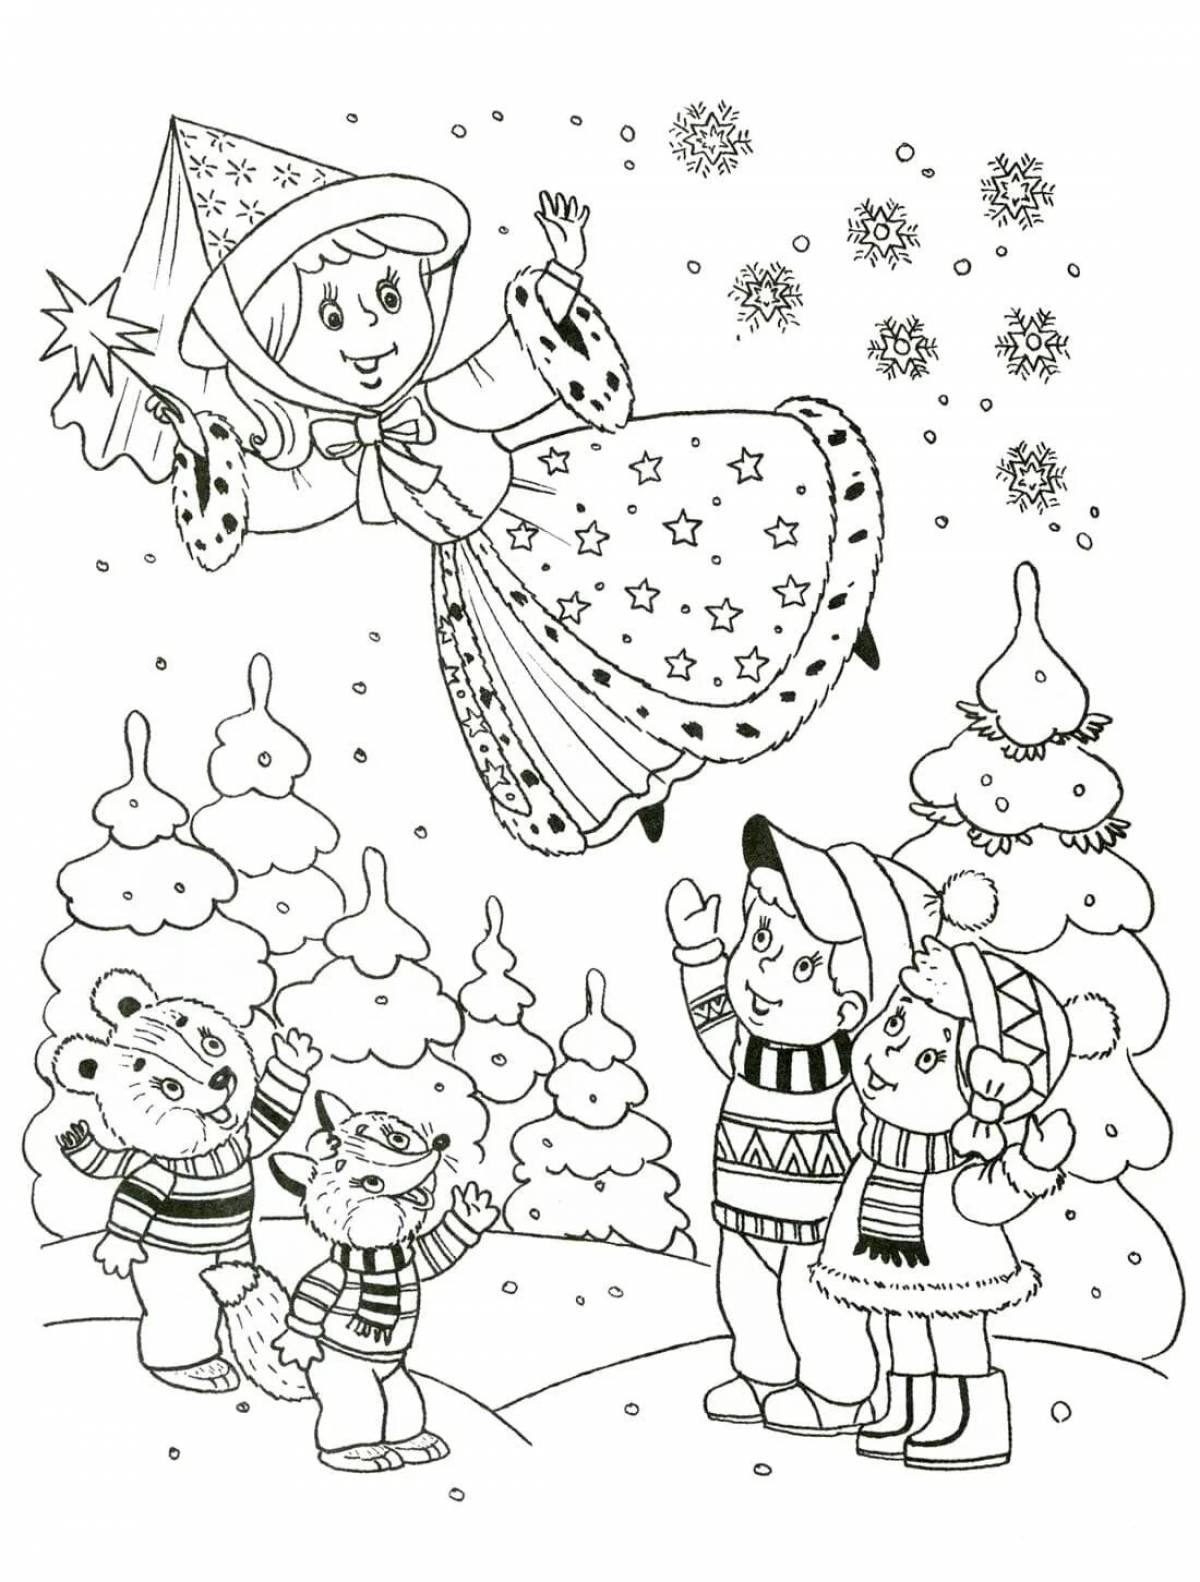 Witch winter #2